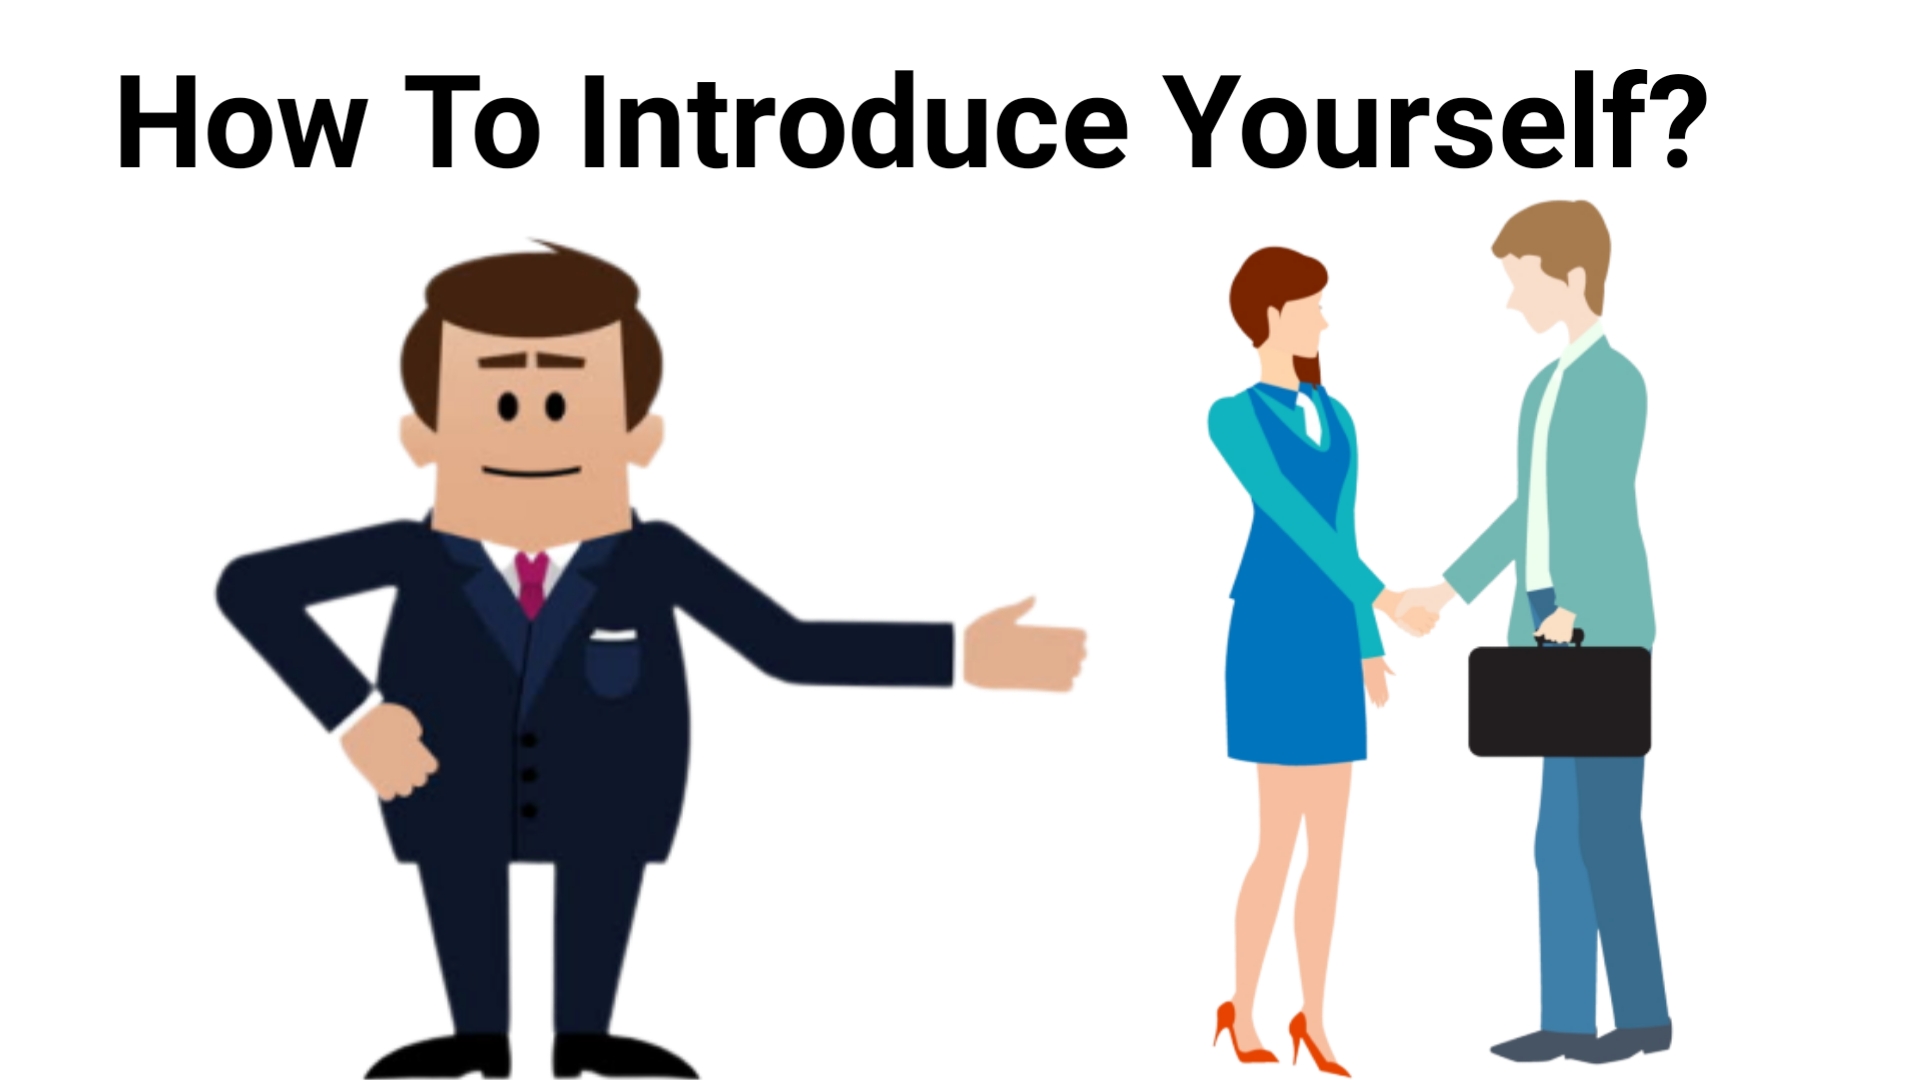 How To Introduce Yourself In Any Interview Or How to Introduce Yourself With Any Person Or strangers?